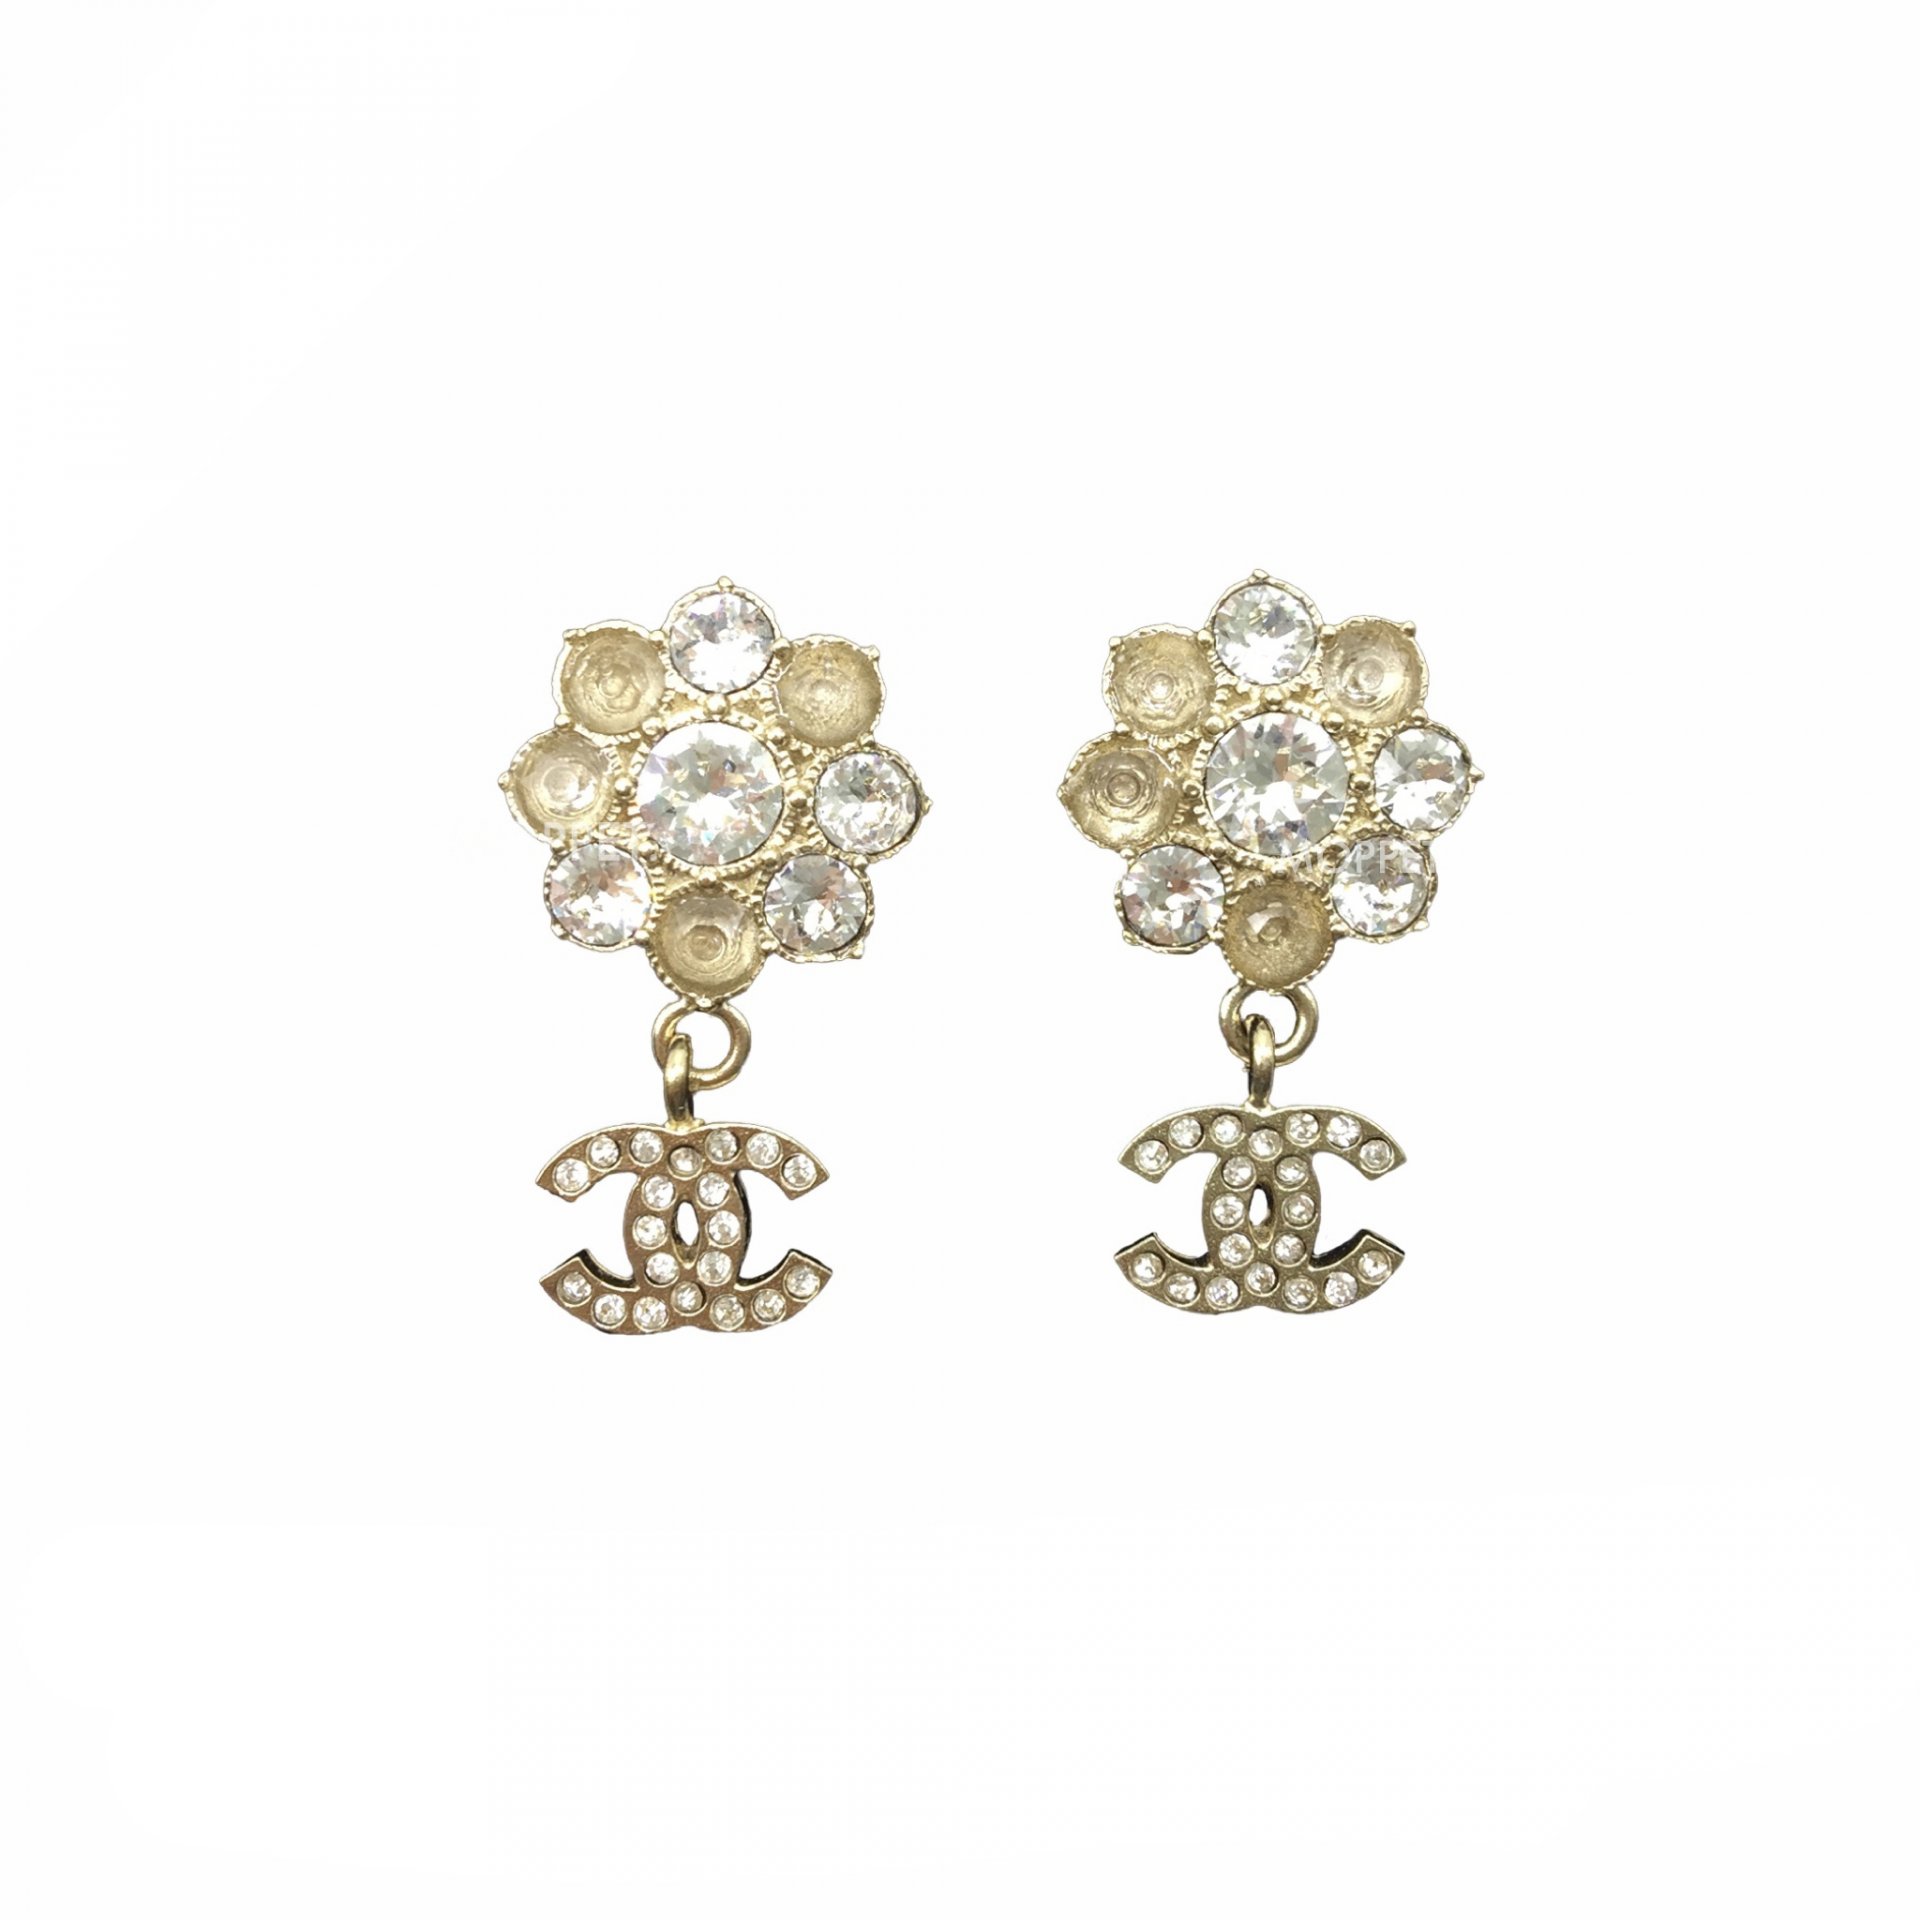 New Chanel CC Flower Earrings 1.5 CM in Crystals GHW